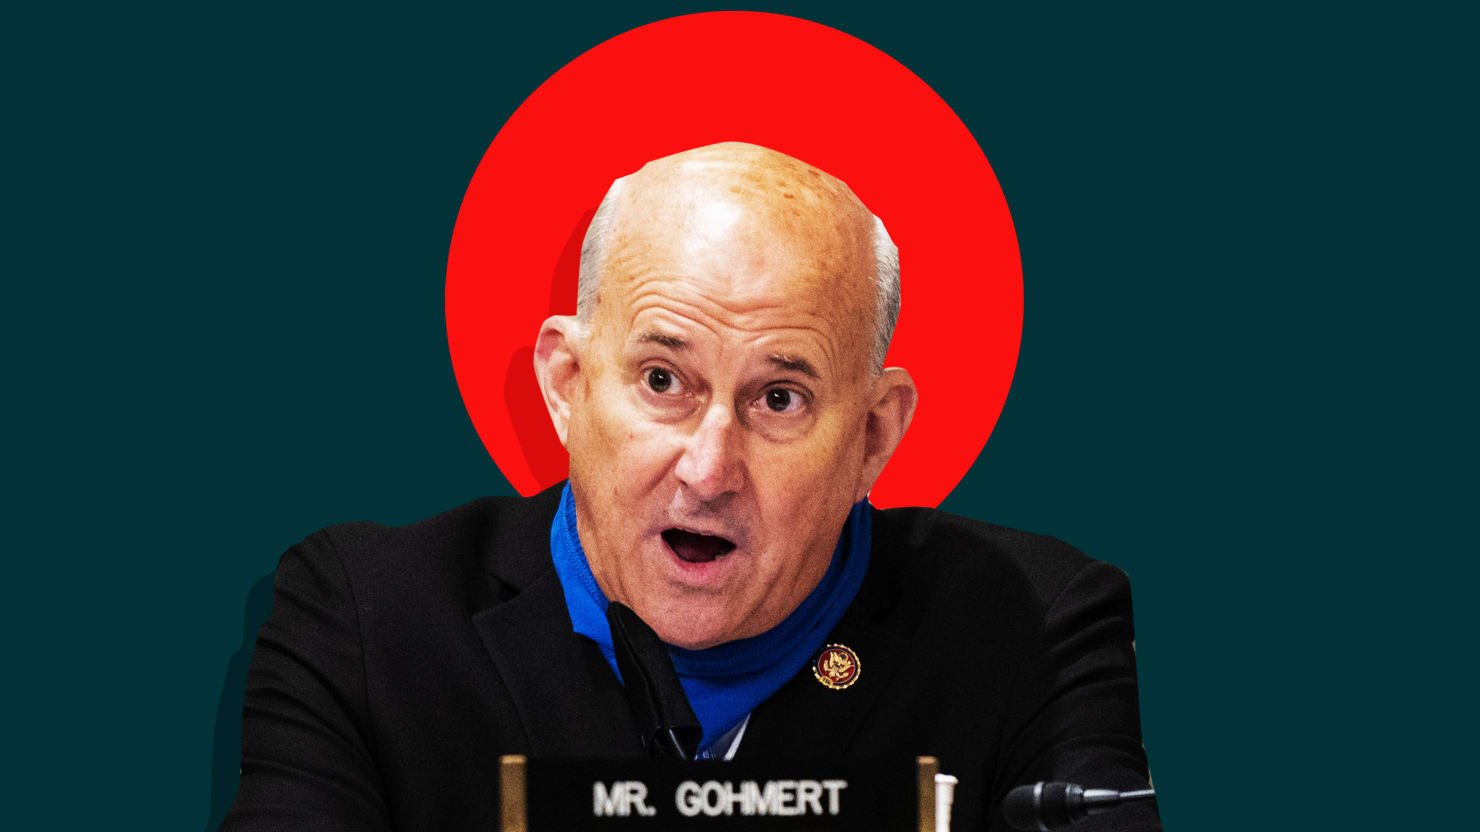 Lawmakers Are ‘Pissed’ at Rep. Louie Gohmert After COVID Diagnosis